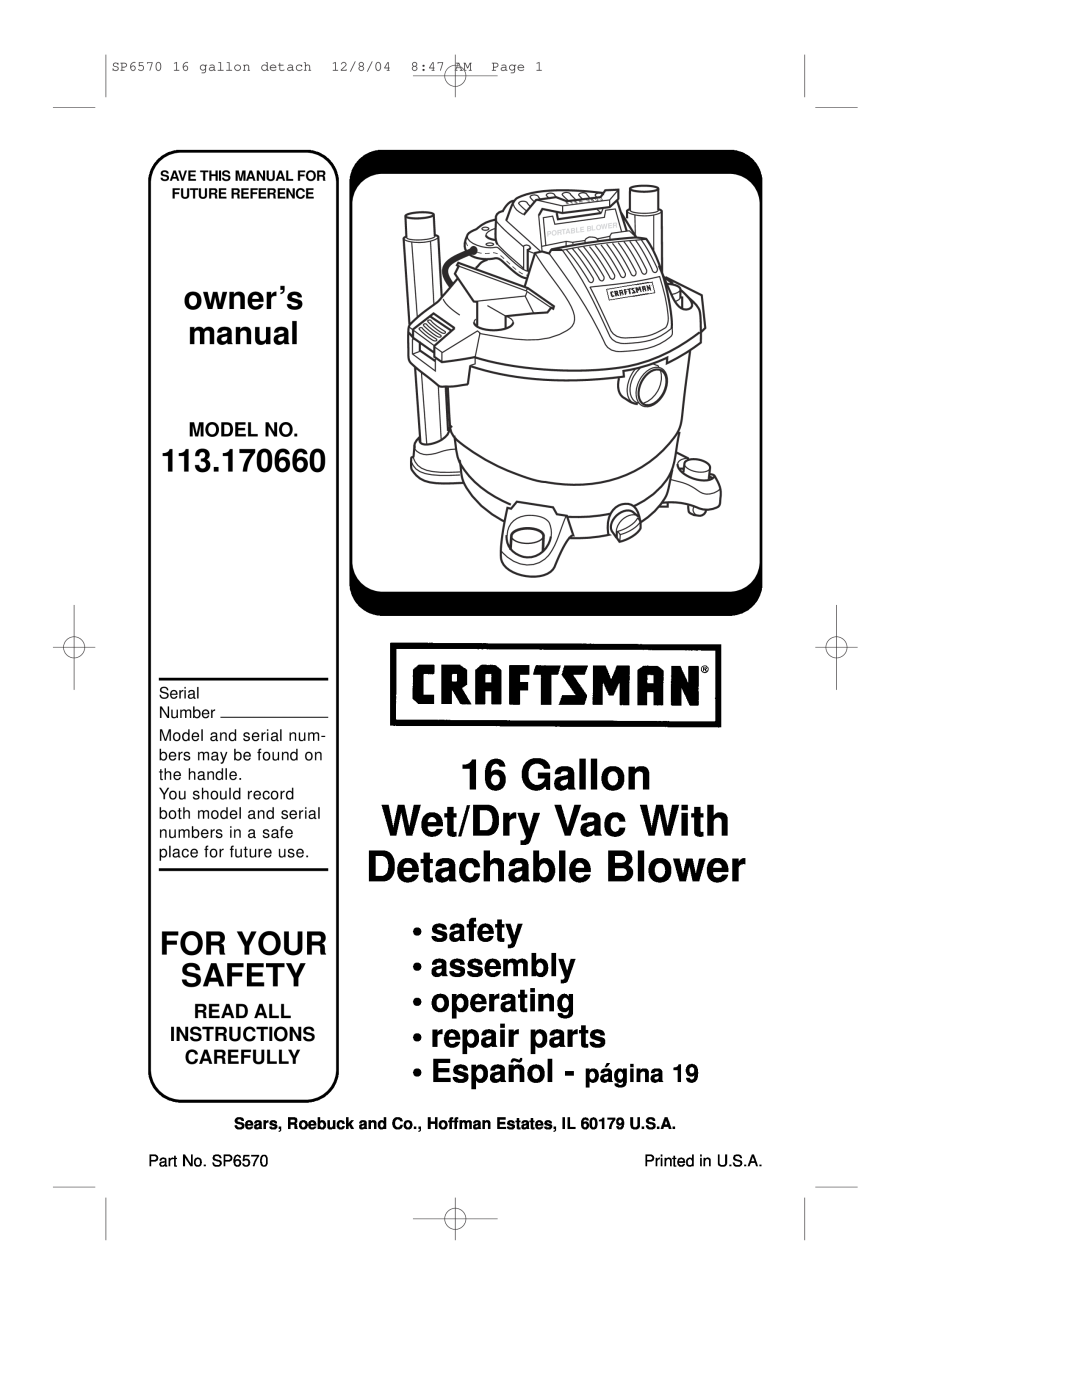 Sears owner manual Gallon Wet/Dry Vac With Detachable Blower, owner’s manual, 113.170660, For Your Safety, Model No 